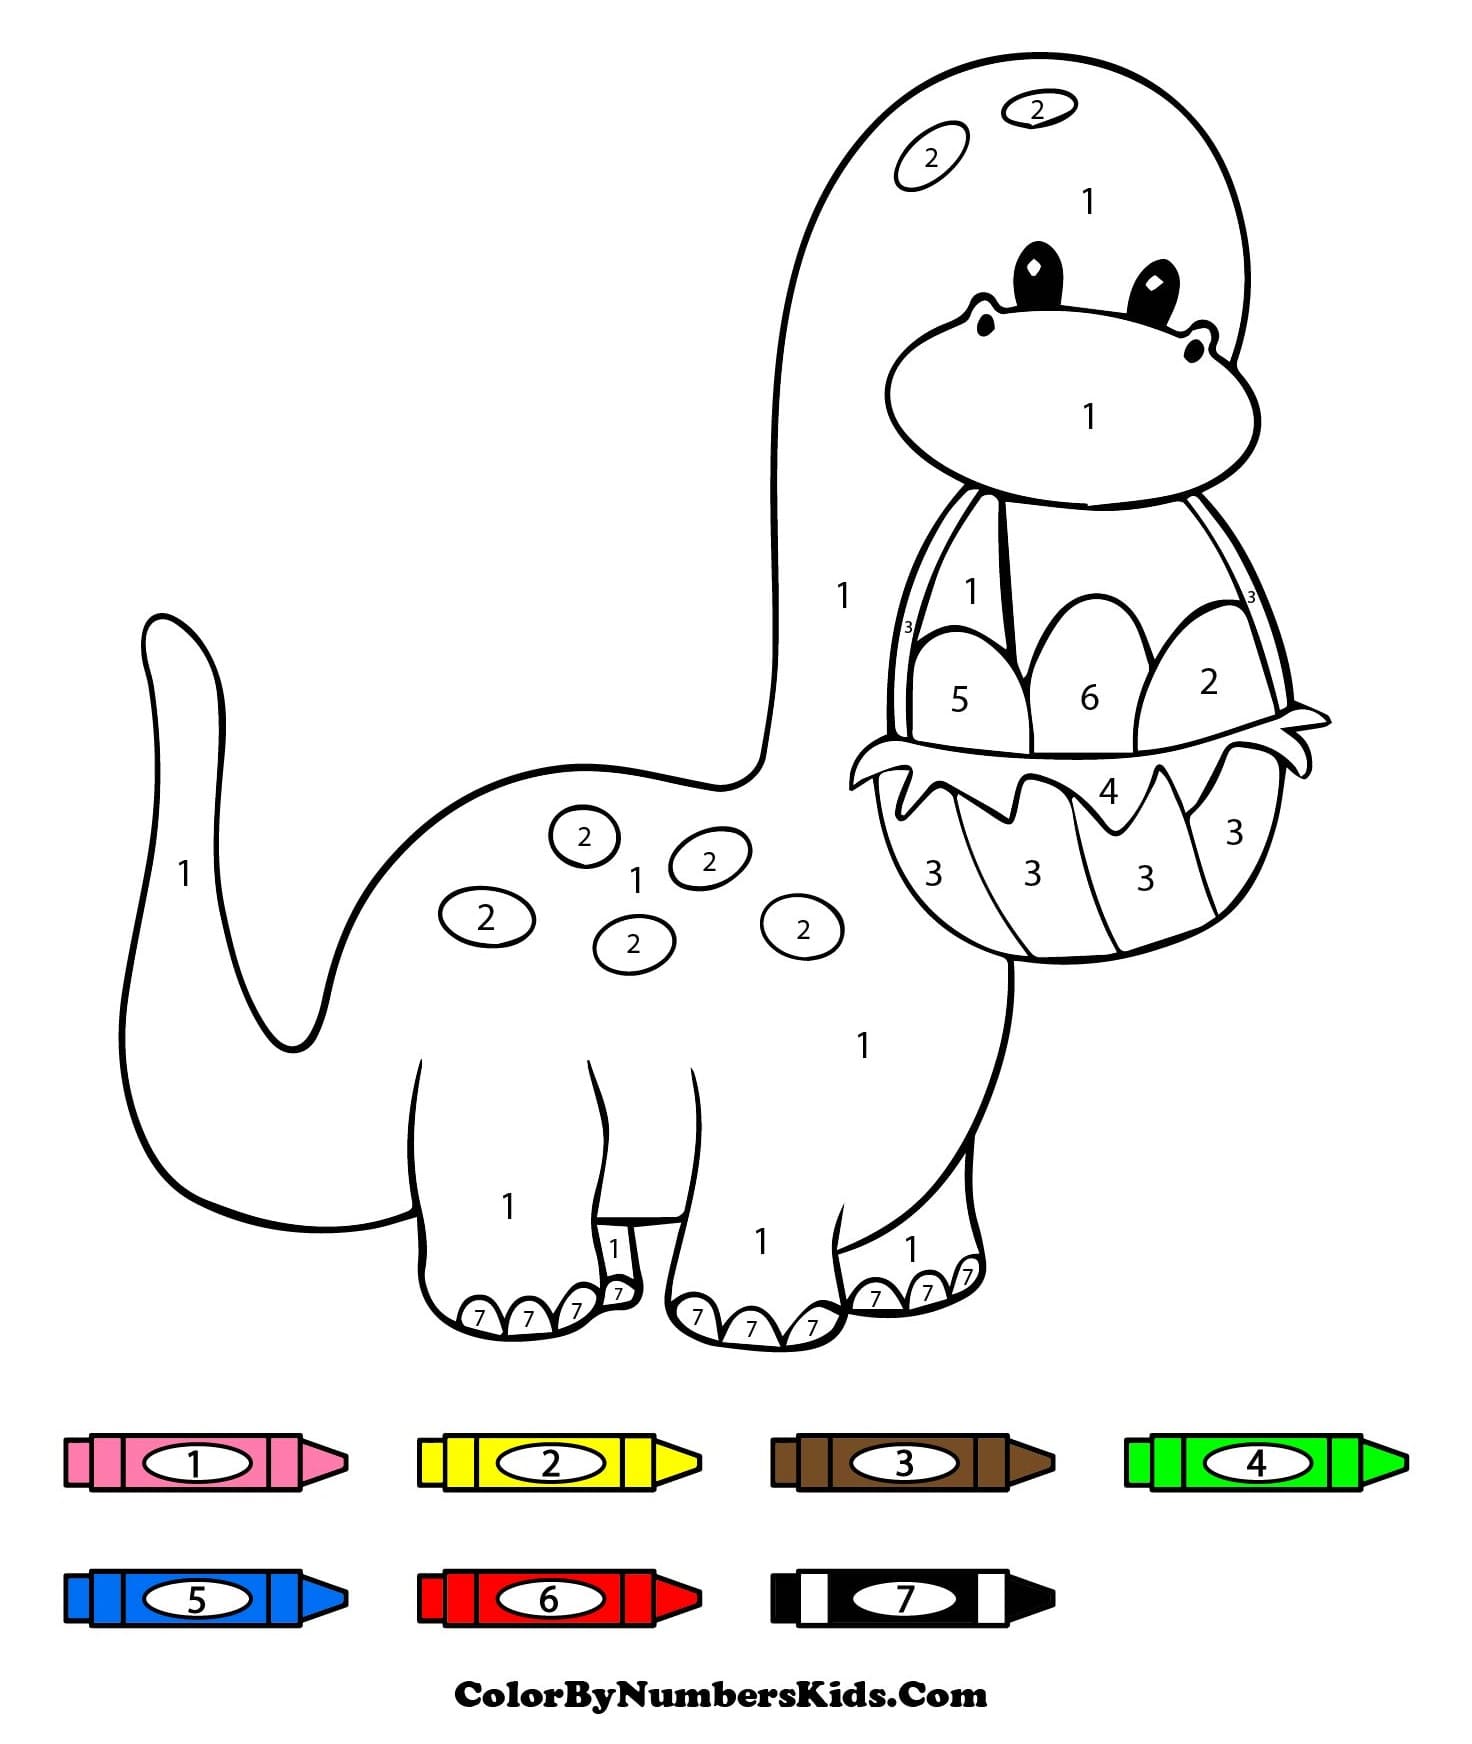 Dinosaur with Eggs Color By Number